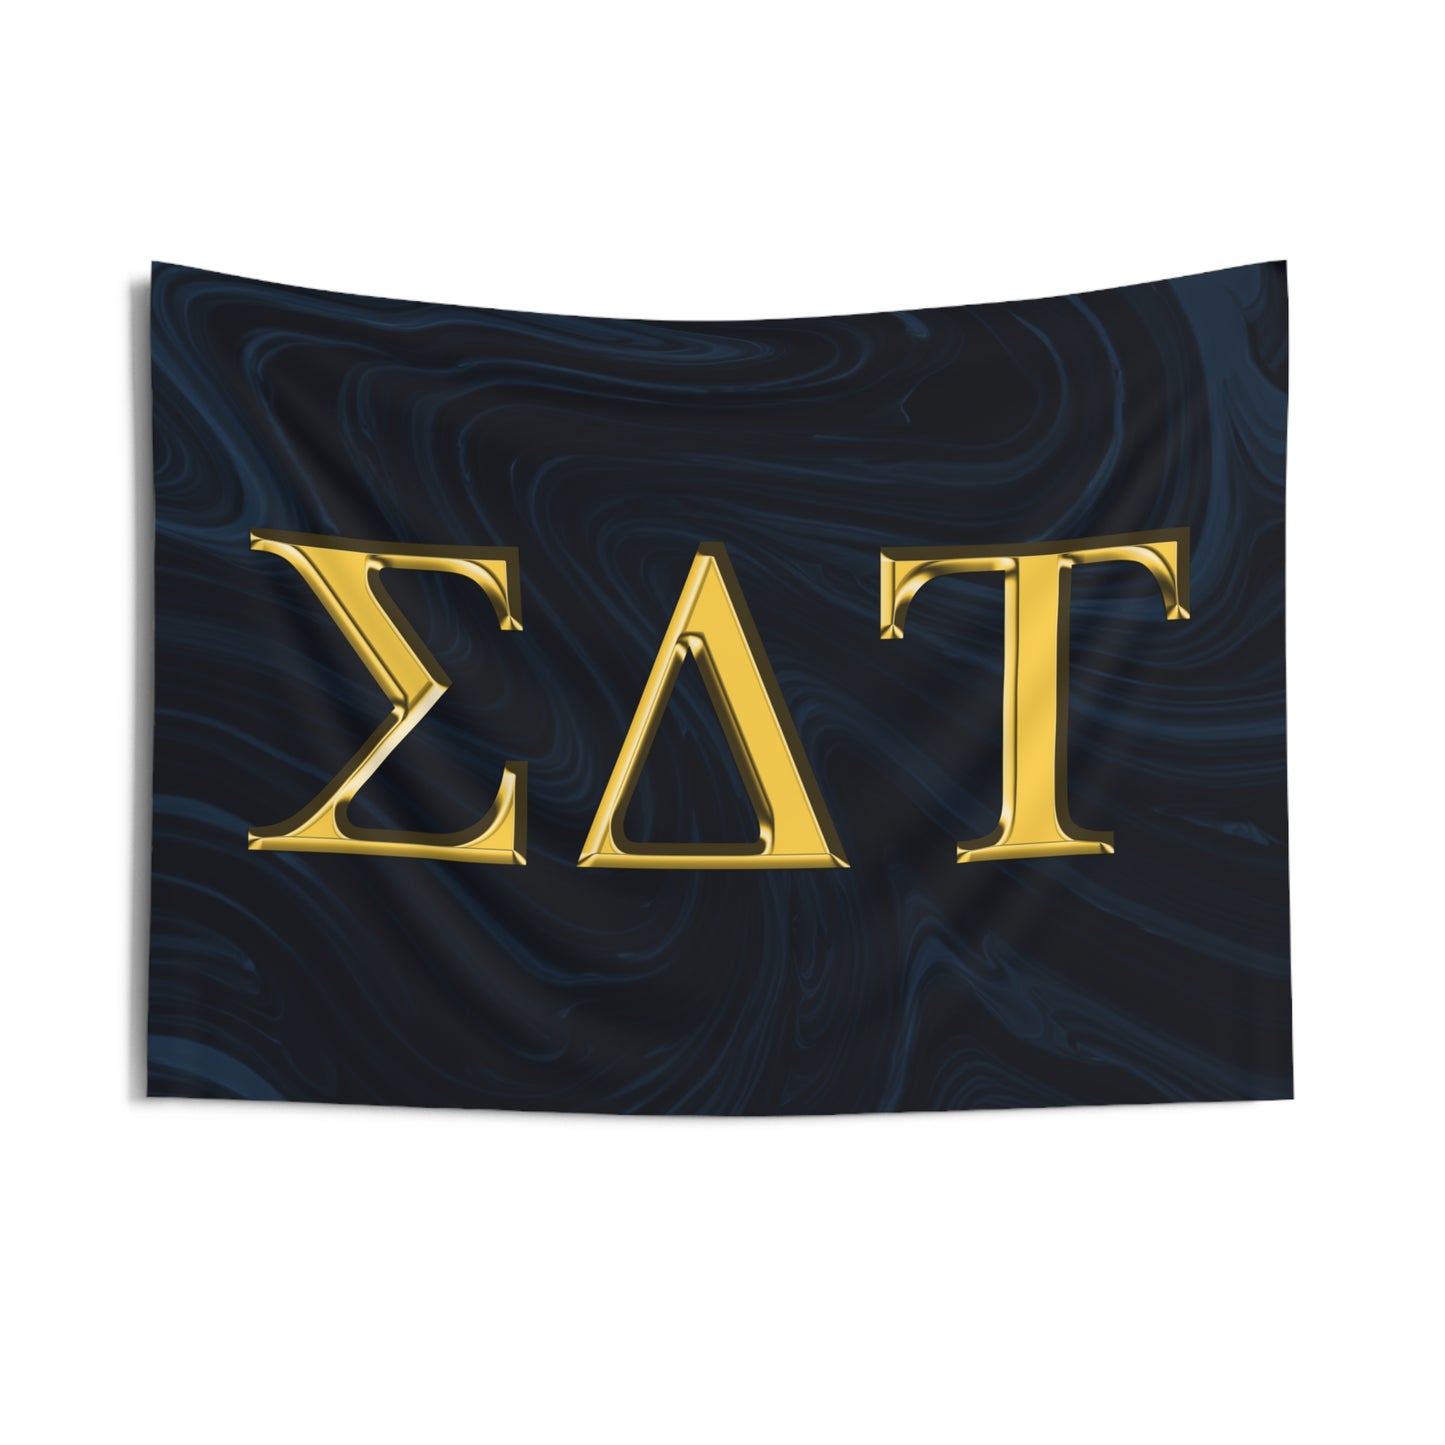 Sigma Delta Tau Wall Flag with Navy & Gold Letters Fraternity Home Decoration for Dorms & Apartments